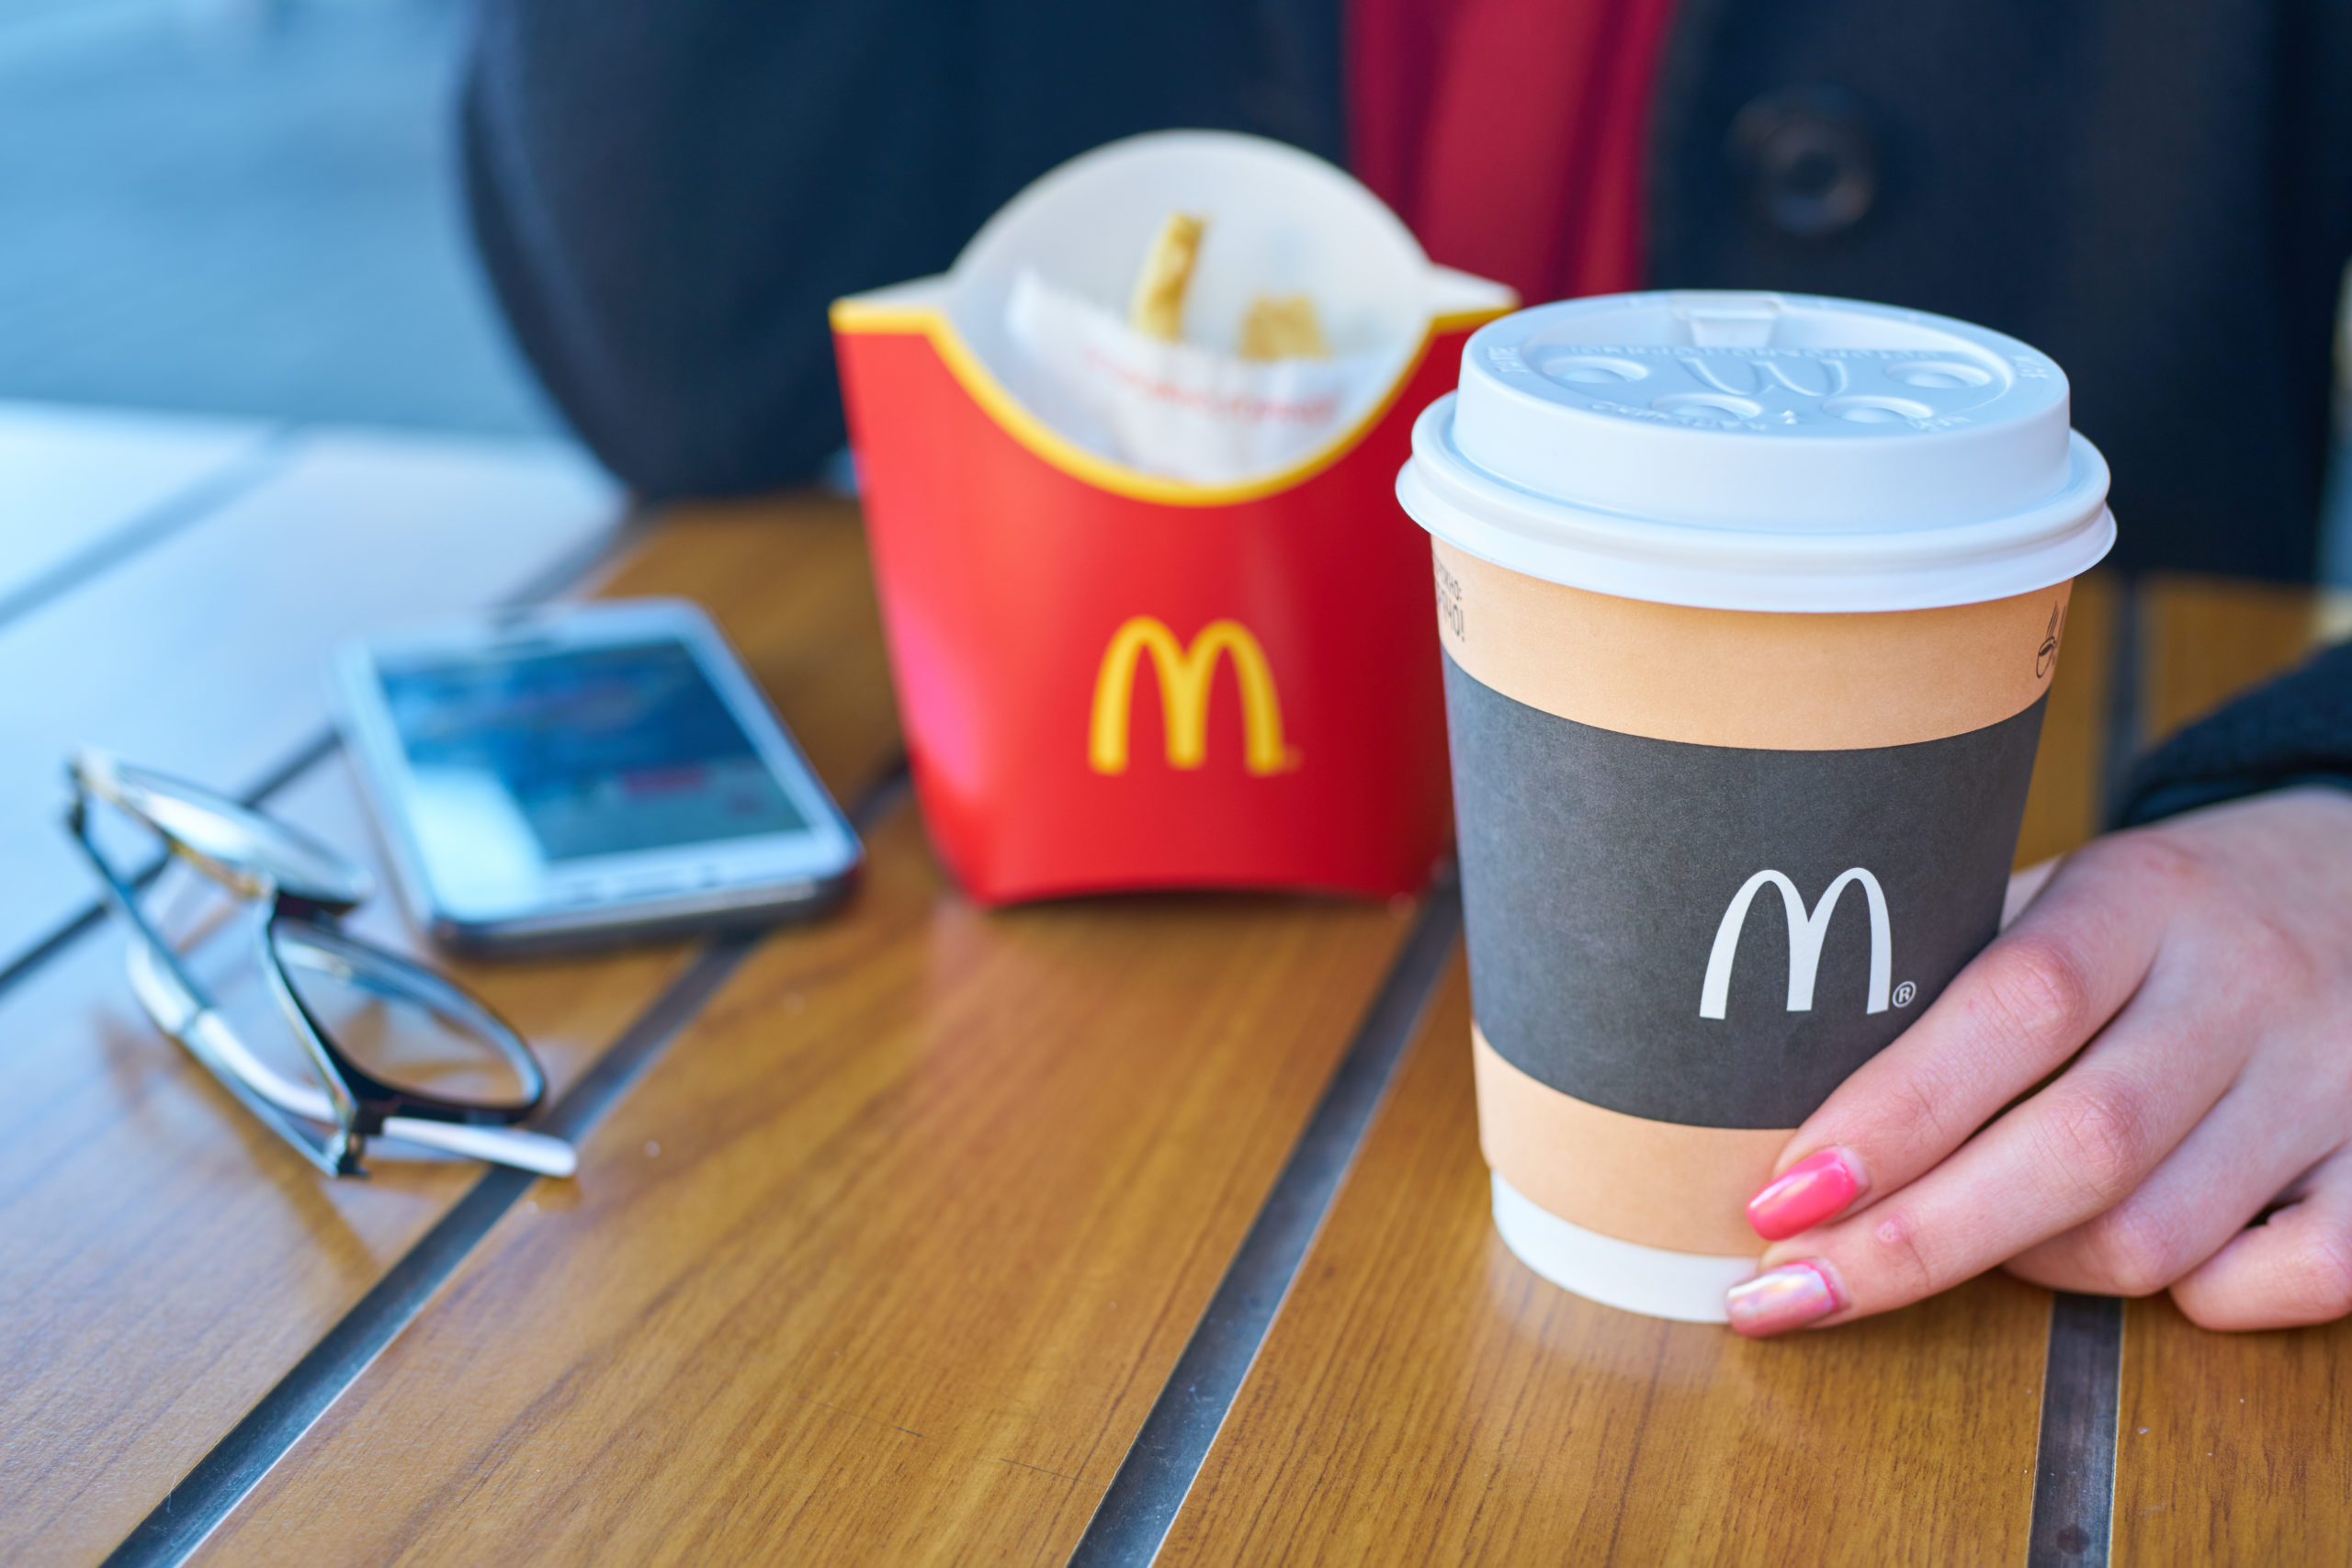 The former McDonald’s manager reveals a trick to finding out if loneliness is good